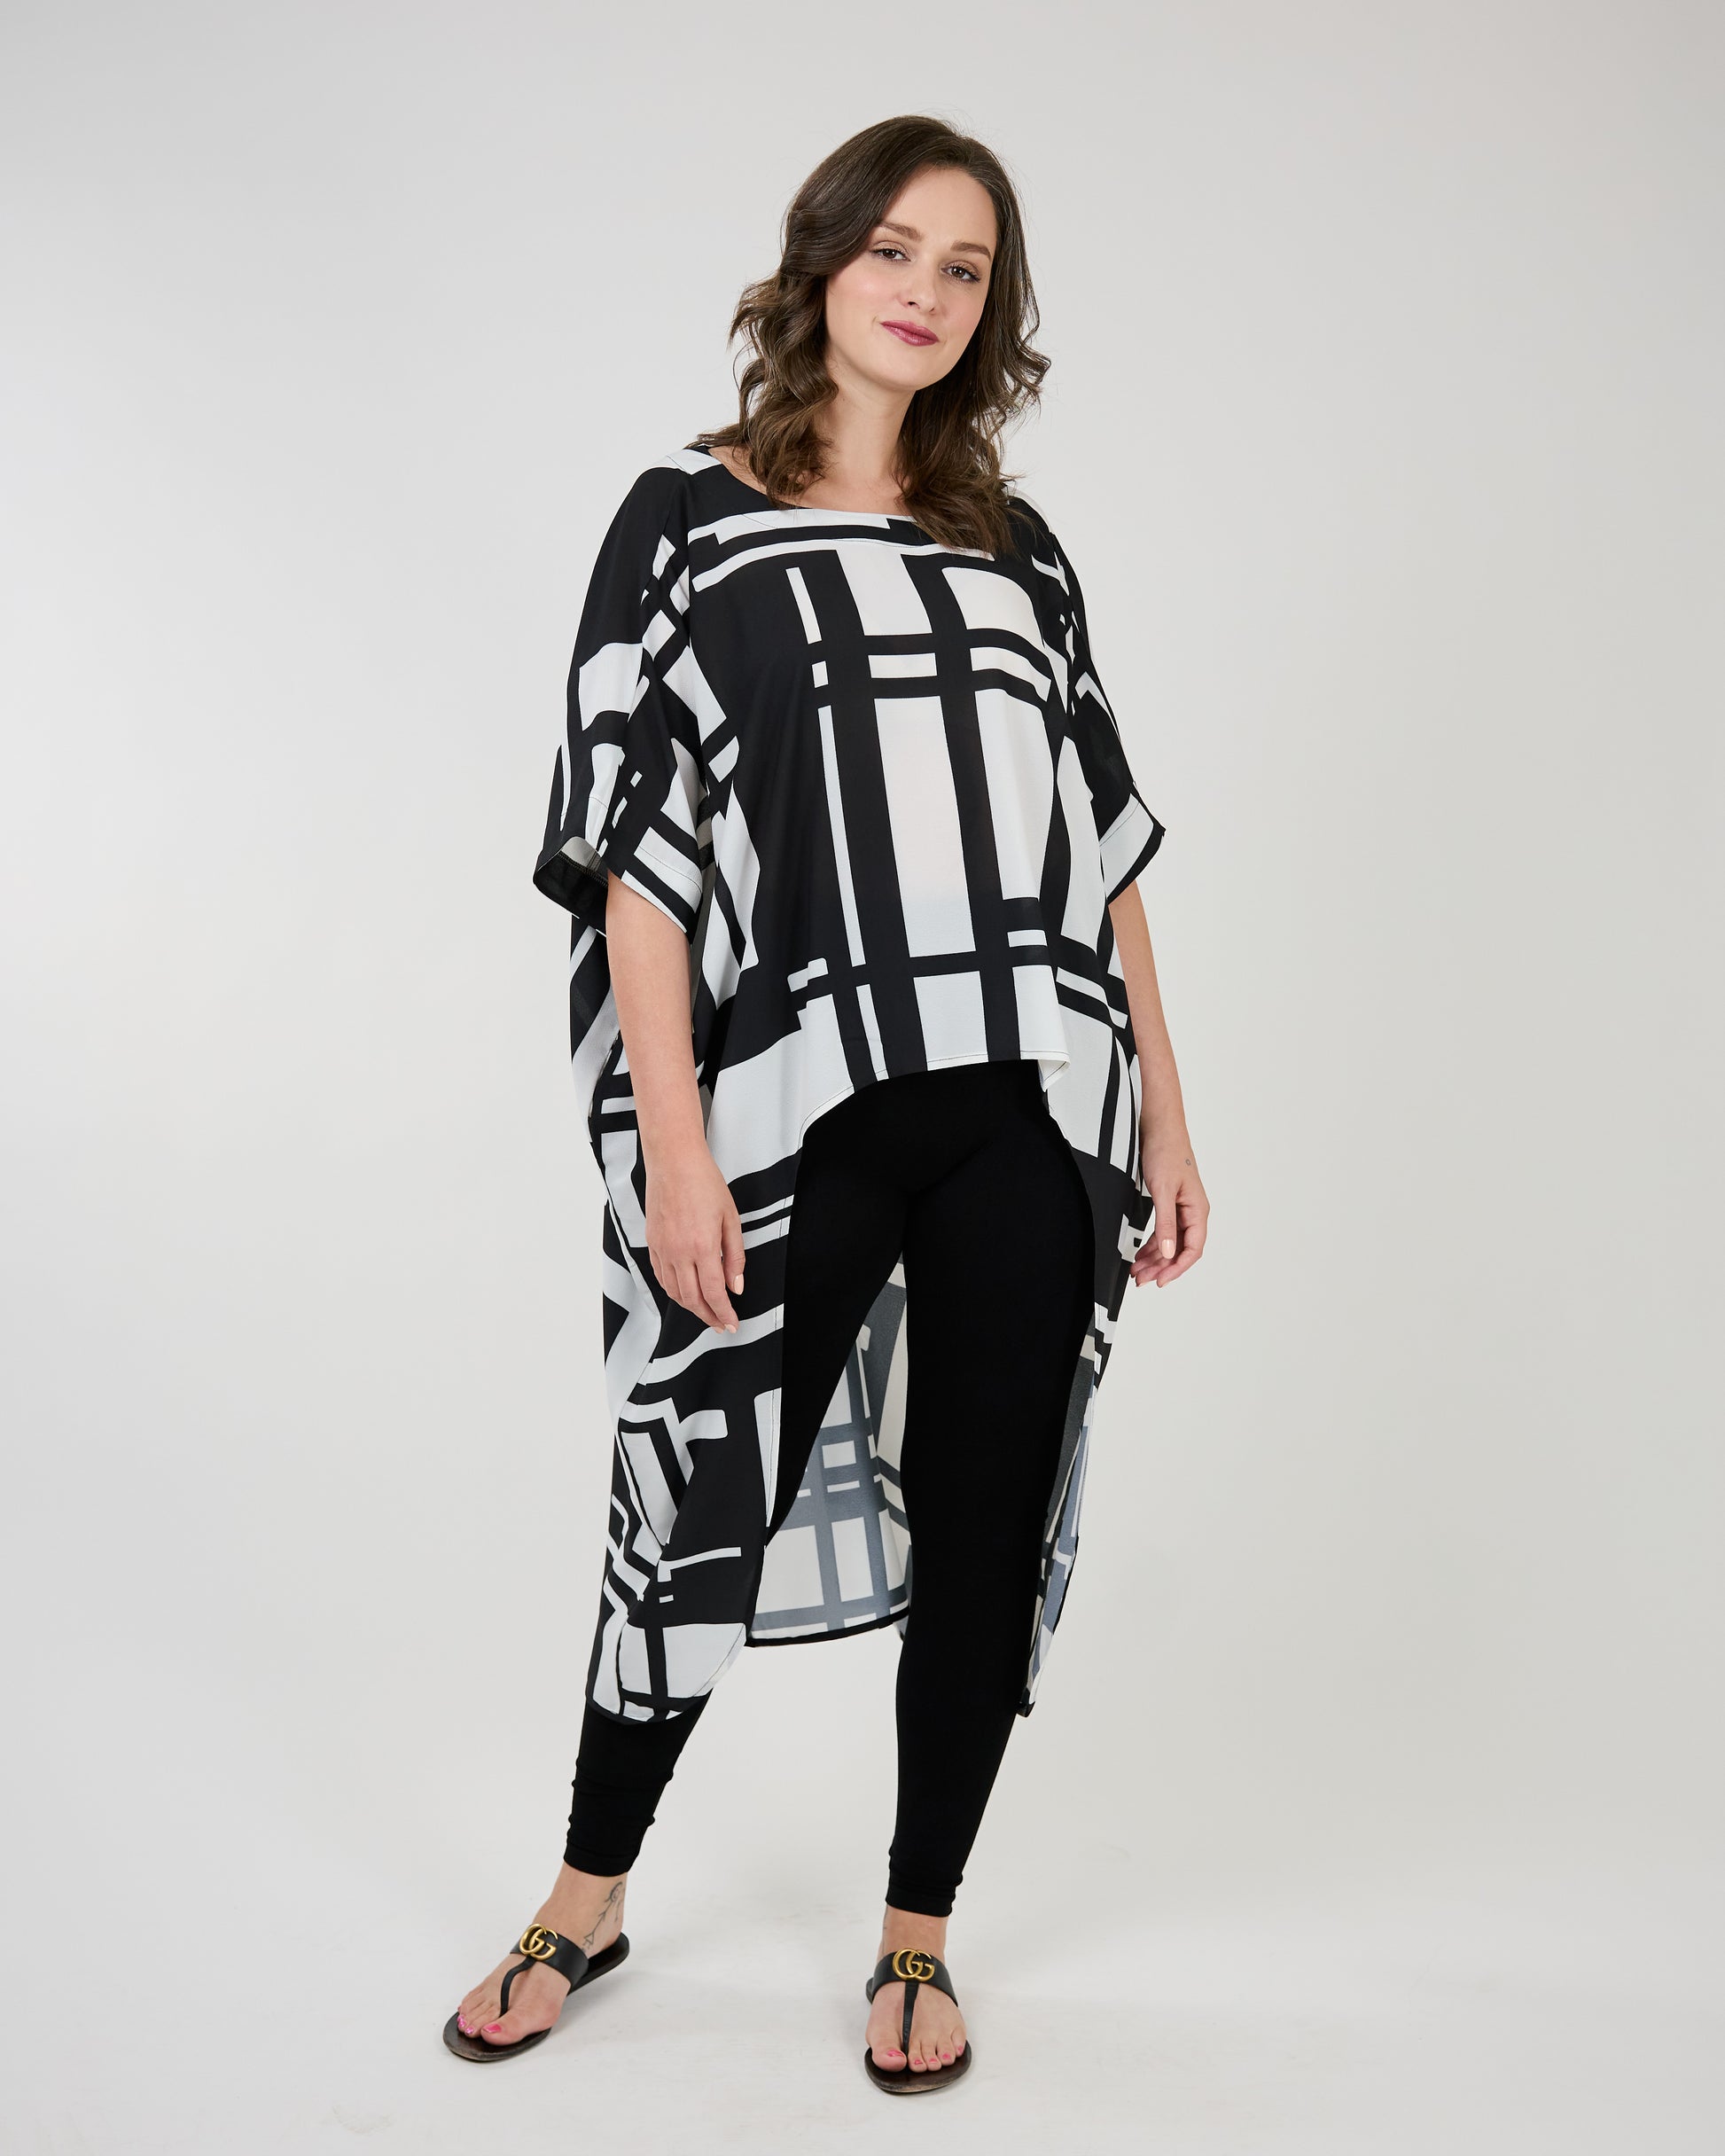 Woman posing in a stylish Shannon Passero Geo Tazia Top with geometric patterns, paired with black leggings and sandals.